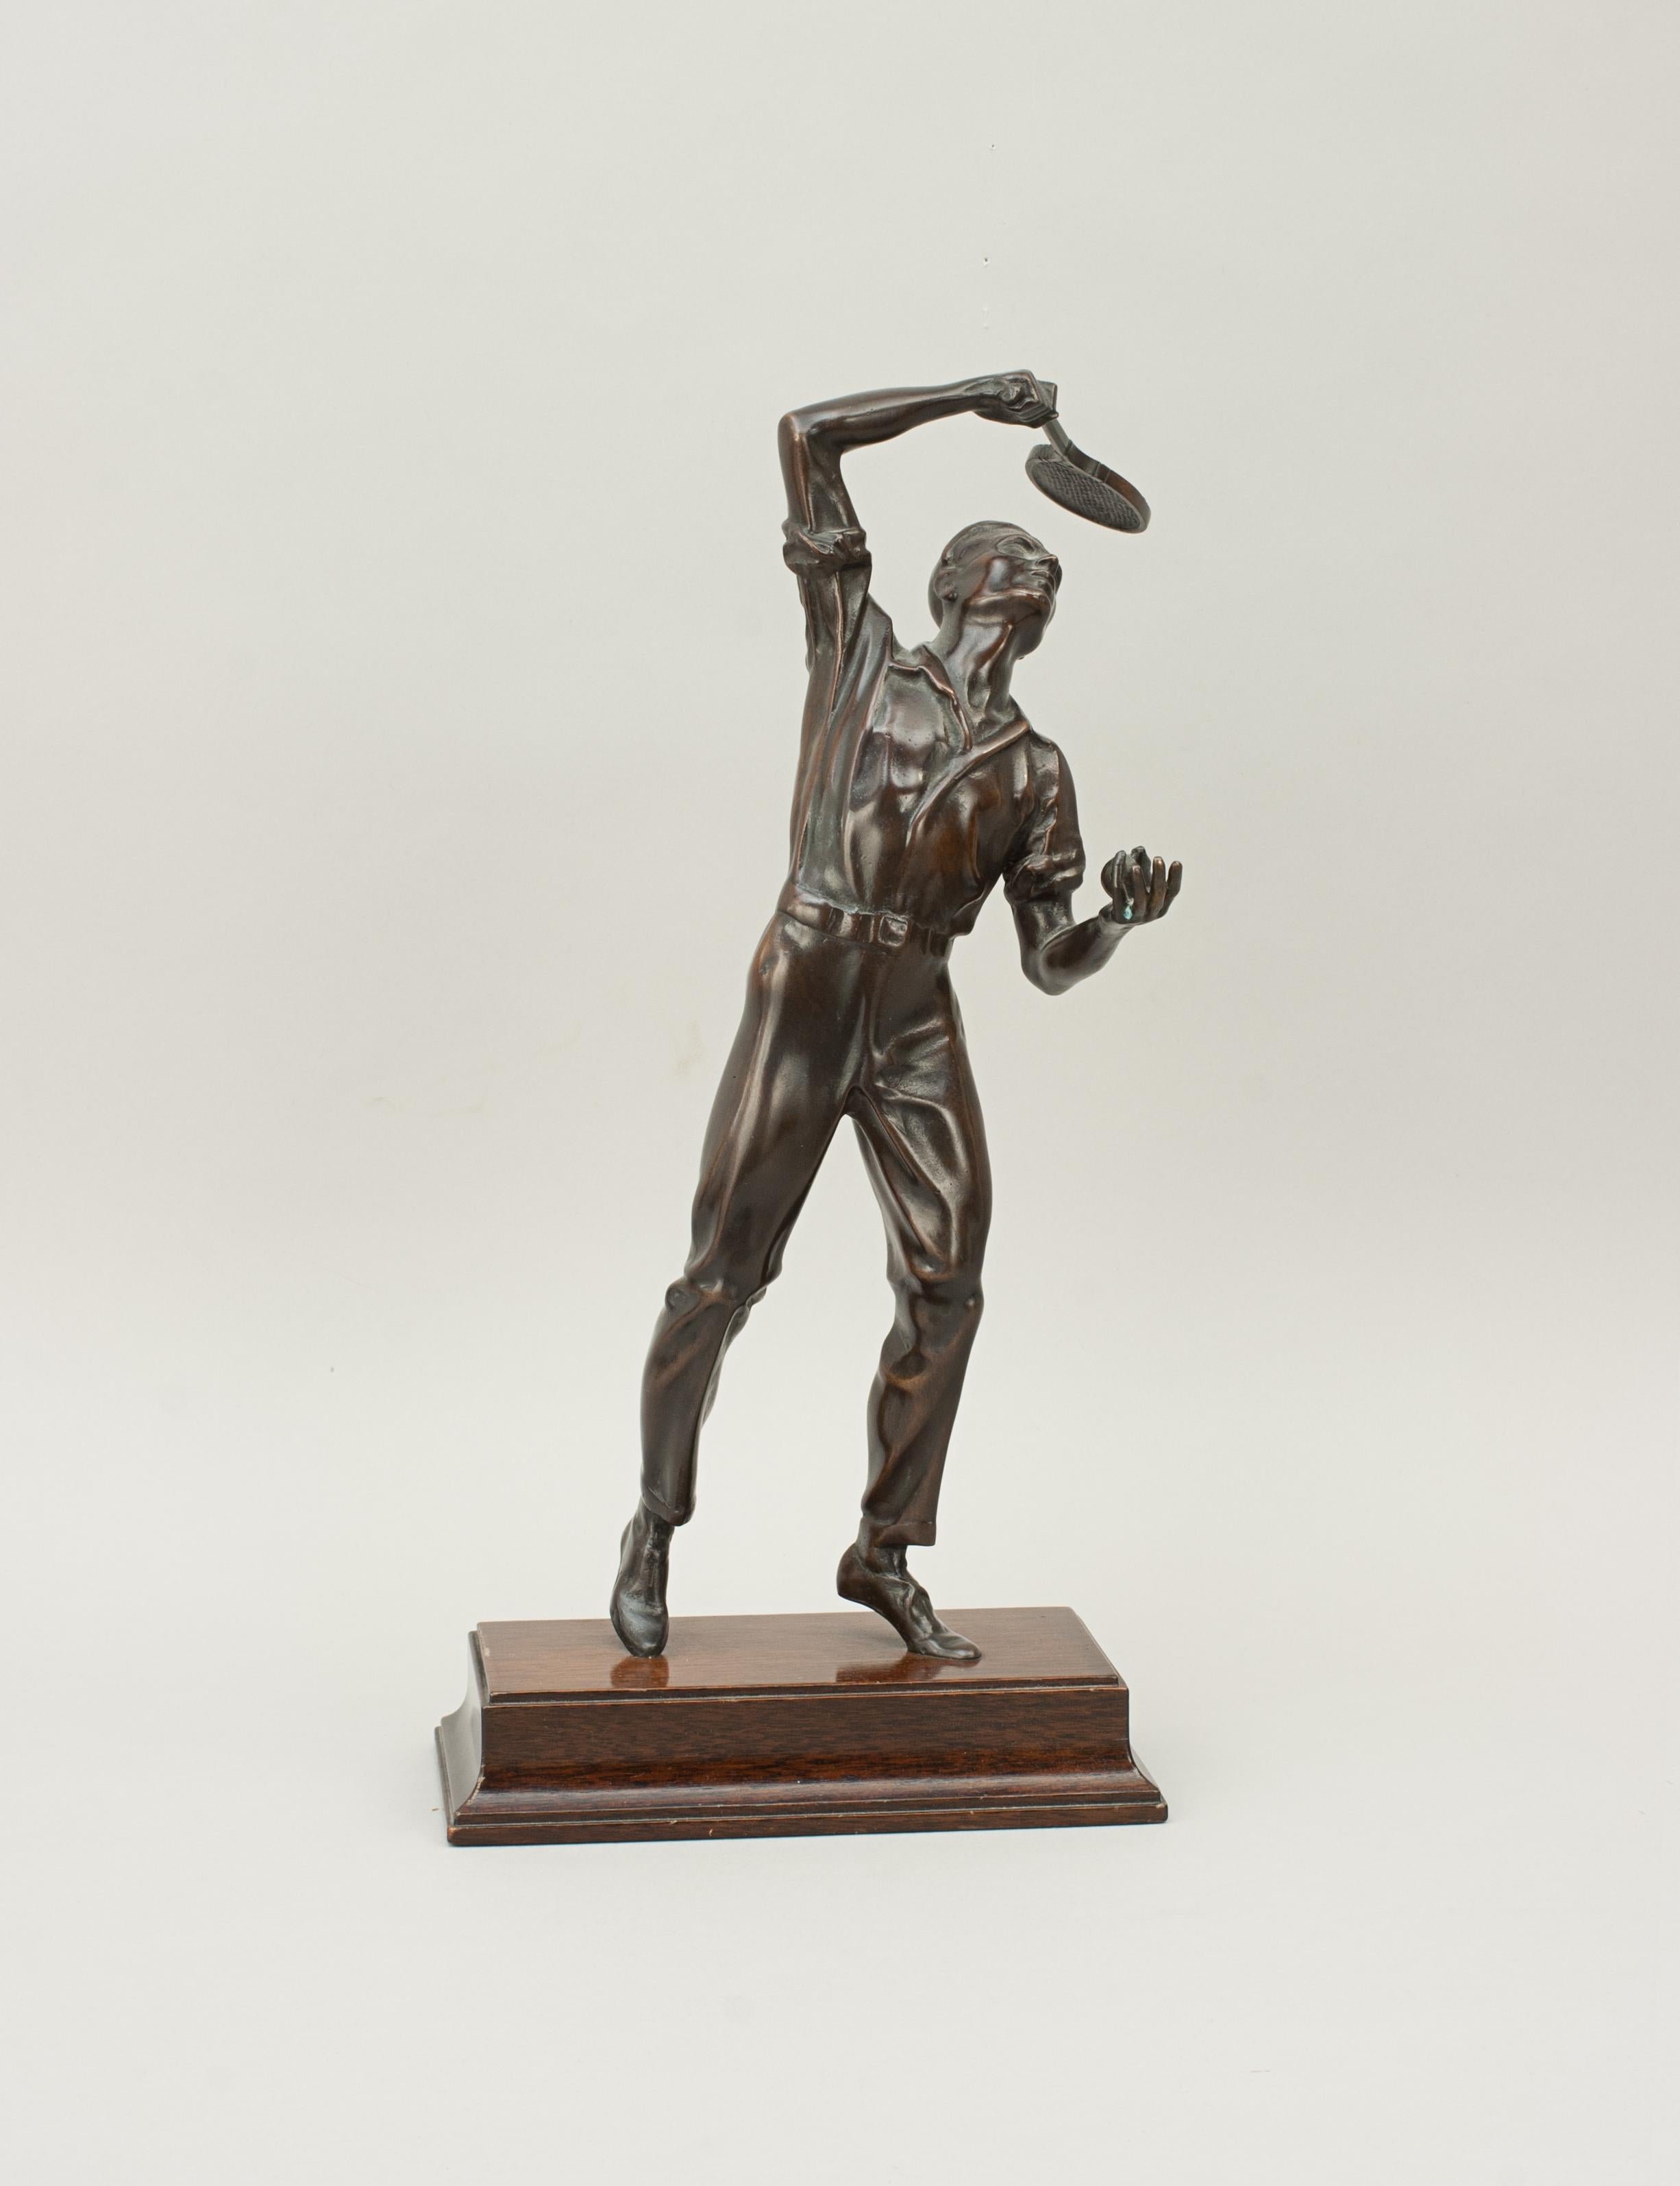 Bronze tennis player statue.
Vintage bronze male tennis player figure mounted onto a mahogany plinth. The tennis player is in mid-serve and is highly detailed especially the head. The gentleman tennis player is wearing a short-sleeved shirt and long